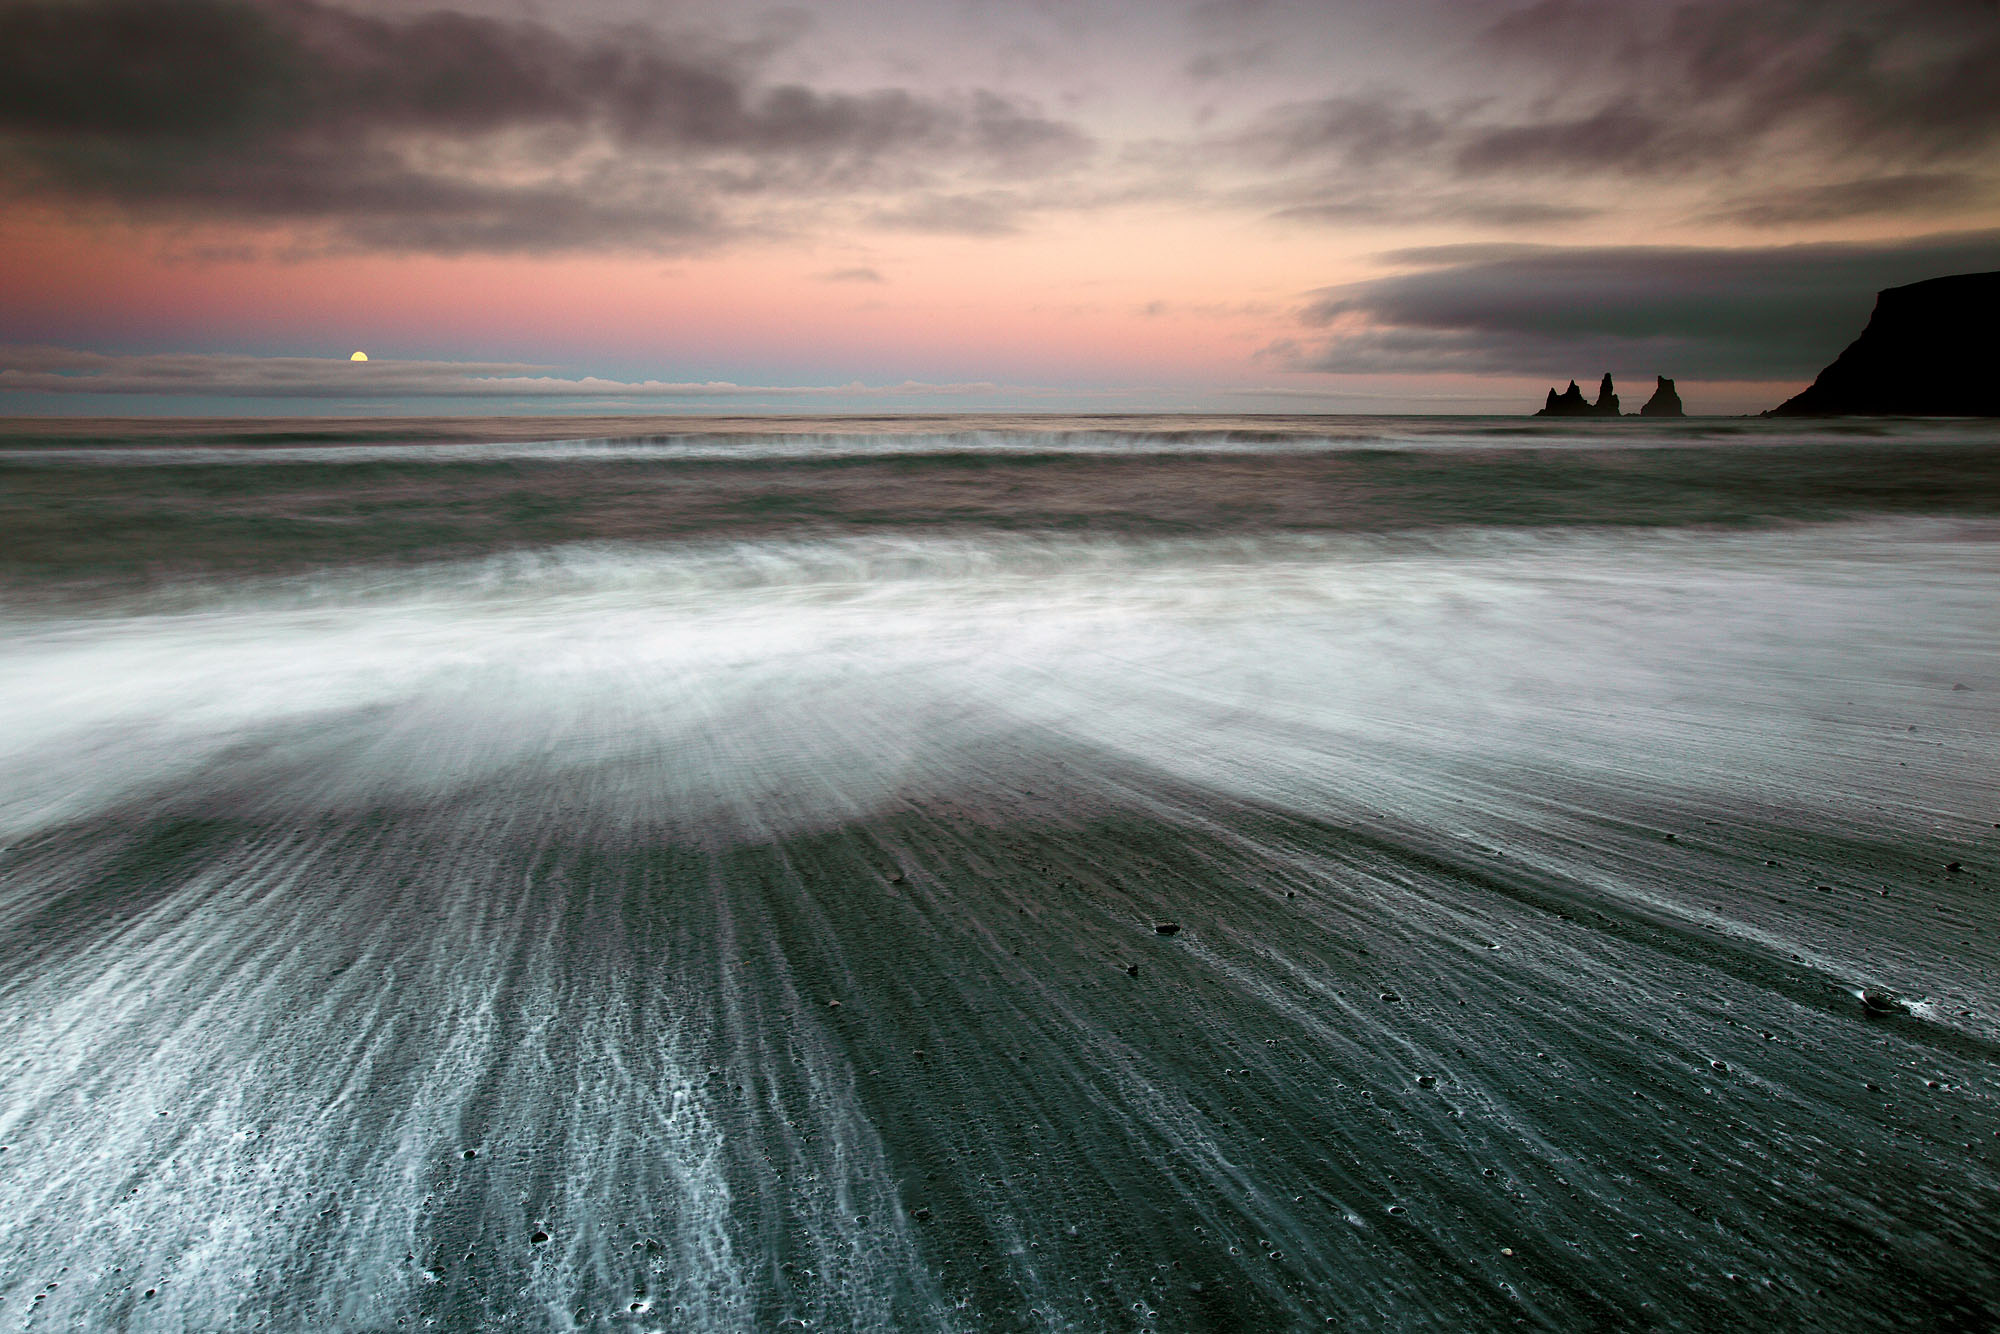 The full moon rising above Vik Strandur beach and the Reynisdrangar rock spires on Iceland at dusk during midsummer while waves create beautiful patterns along the shoreline